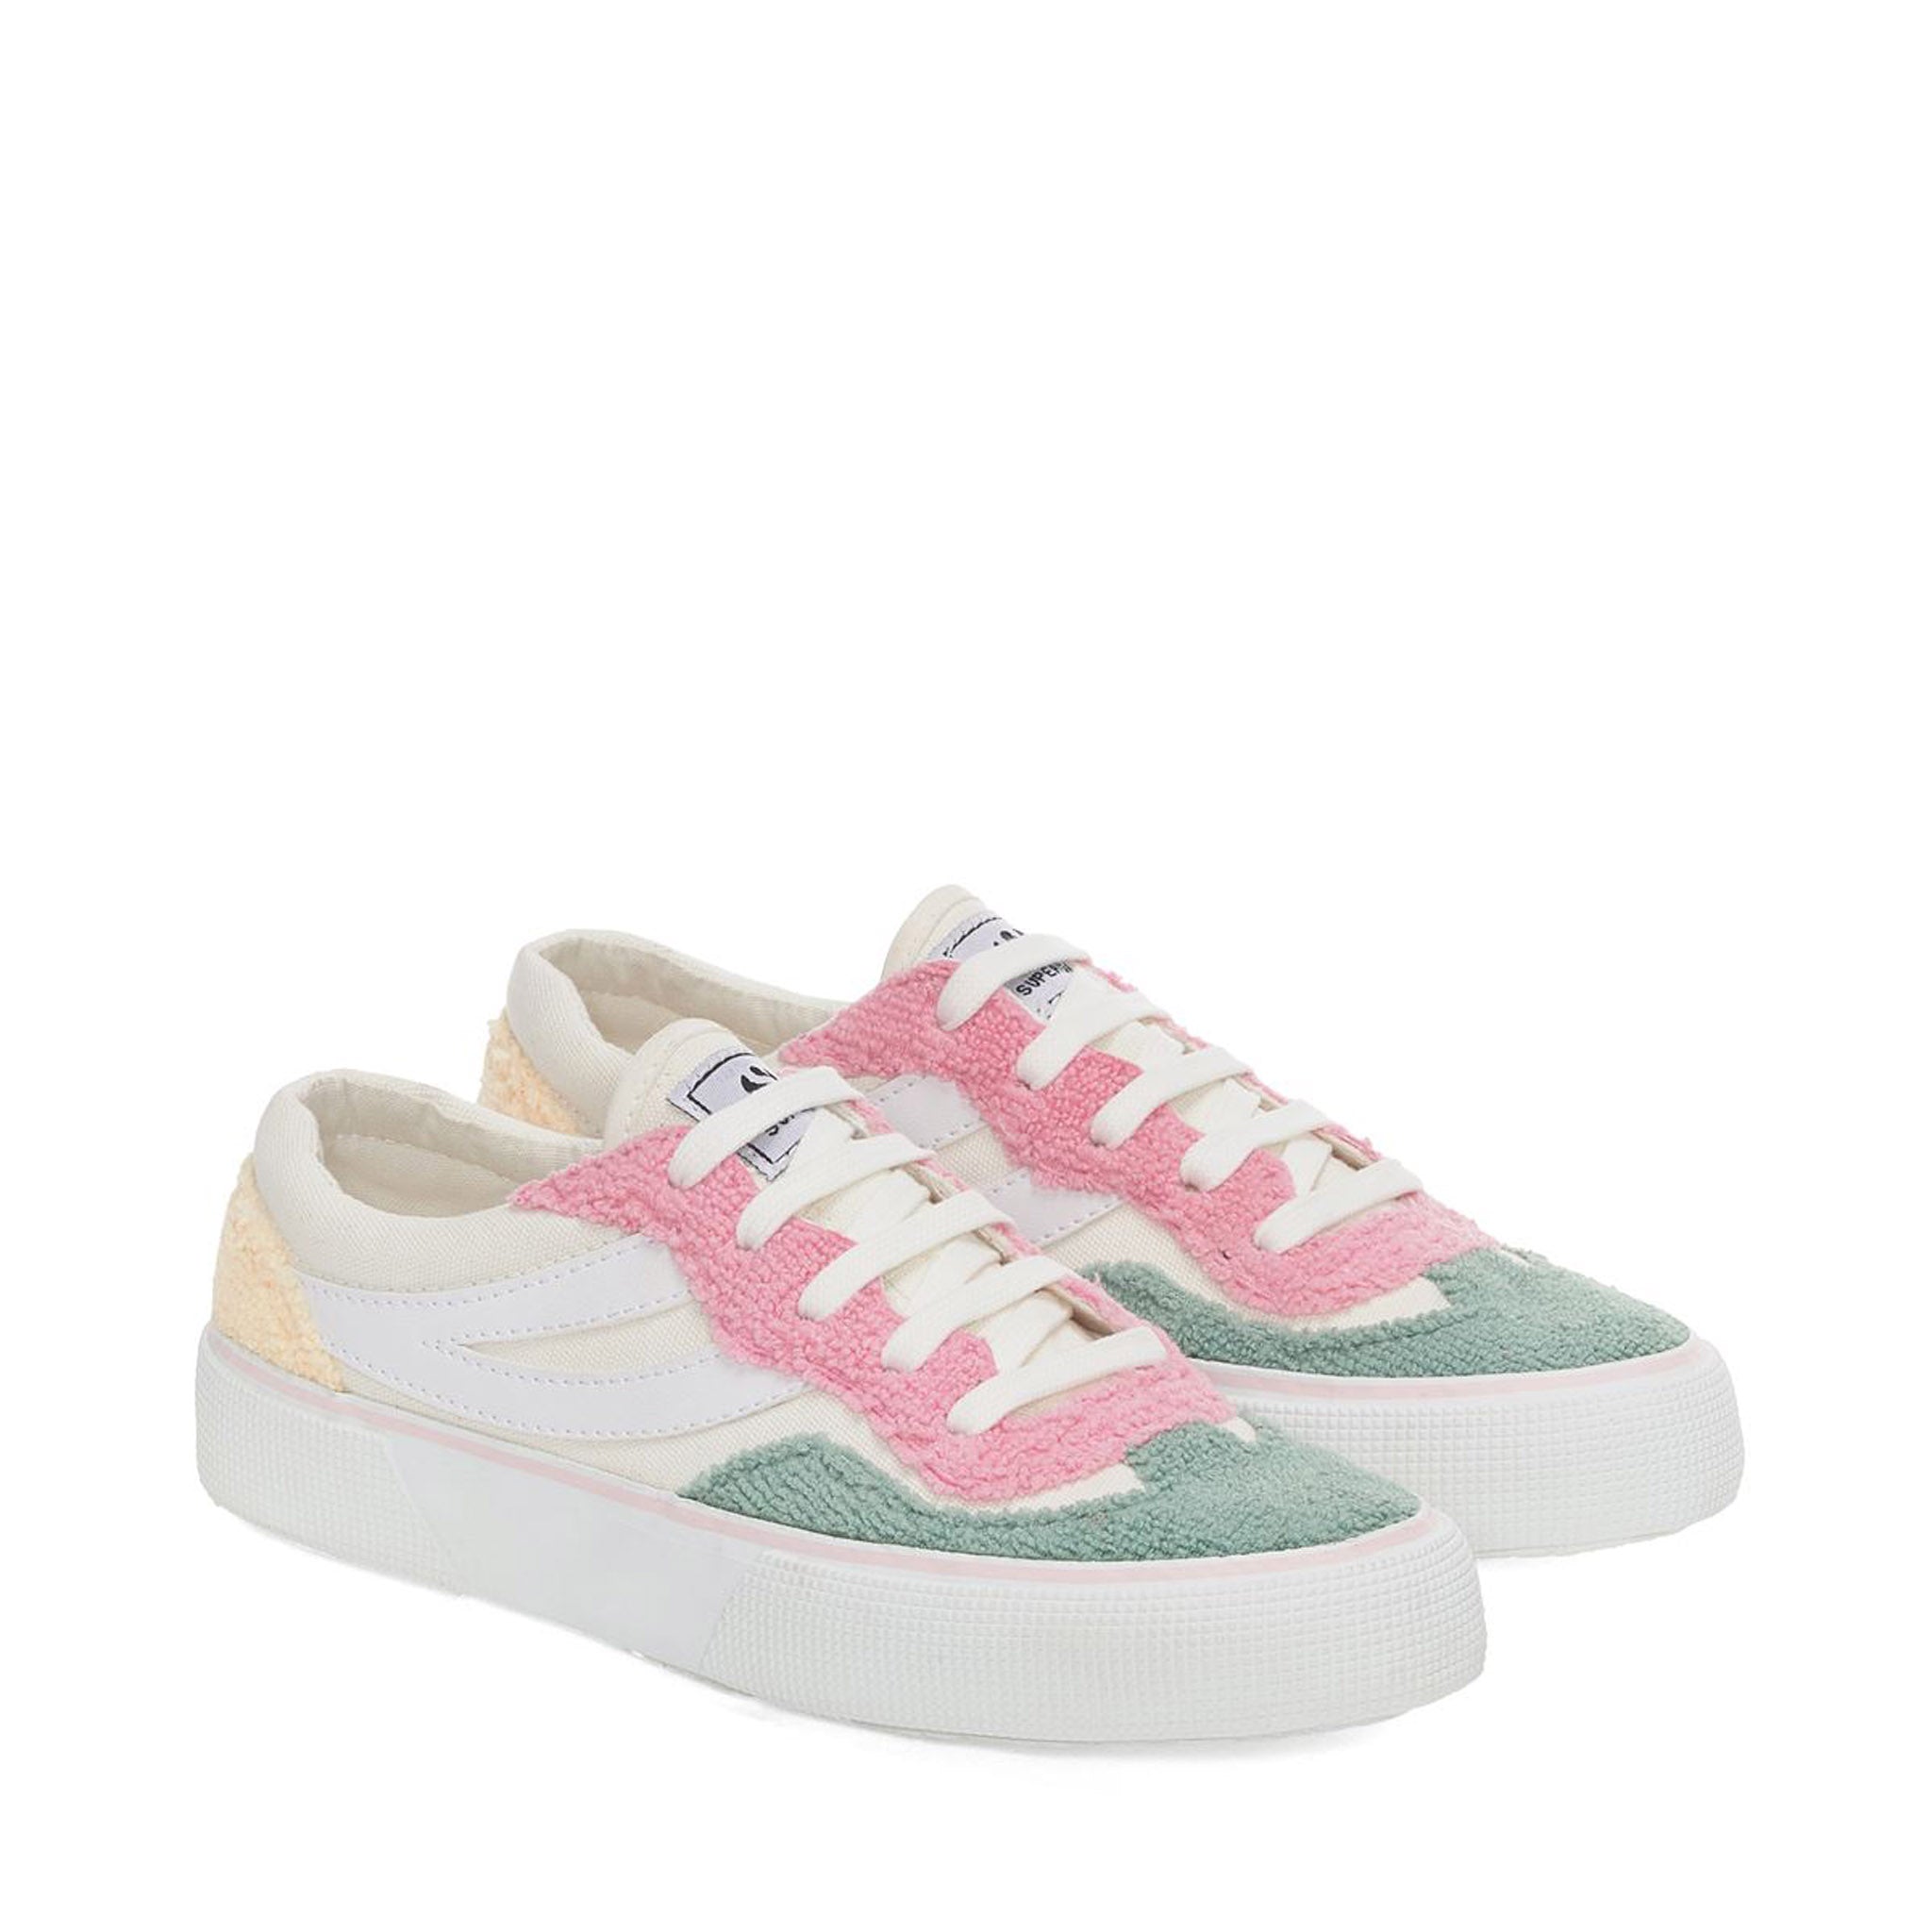 Superga 2941 Revolley Terry Cloth Sneakers - Pink White Icing Green Sage. Front view.